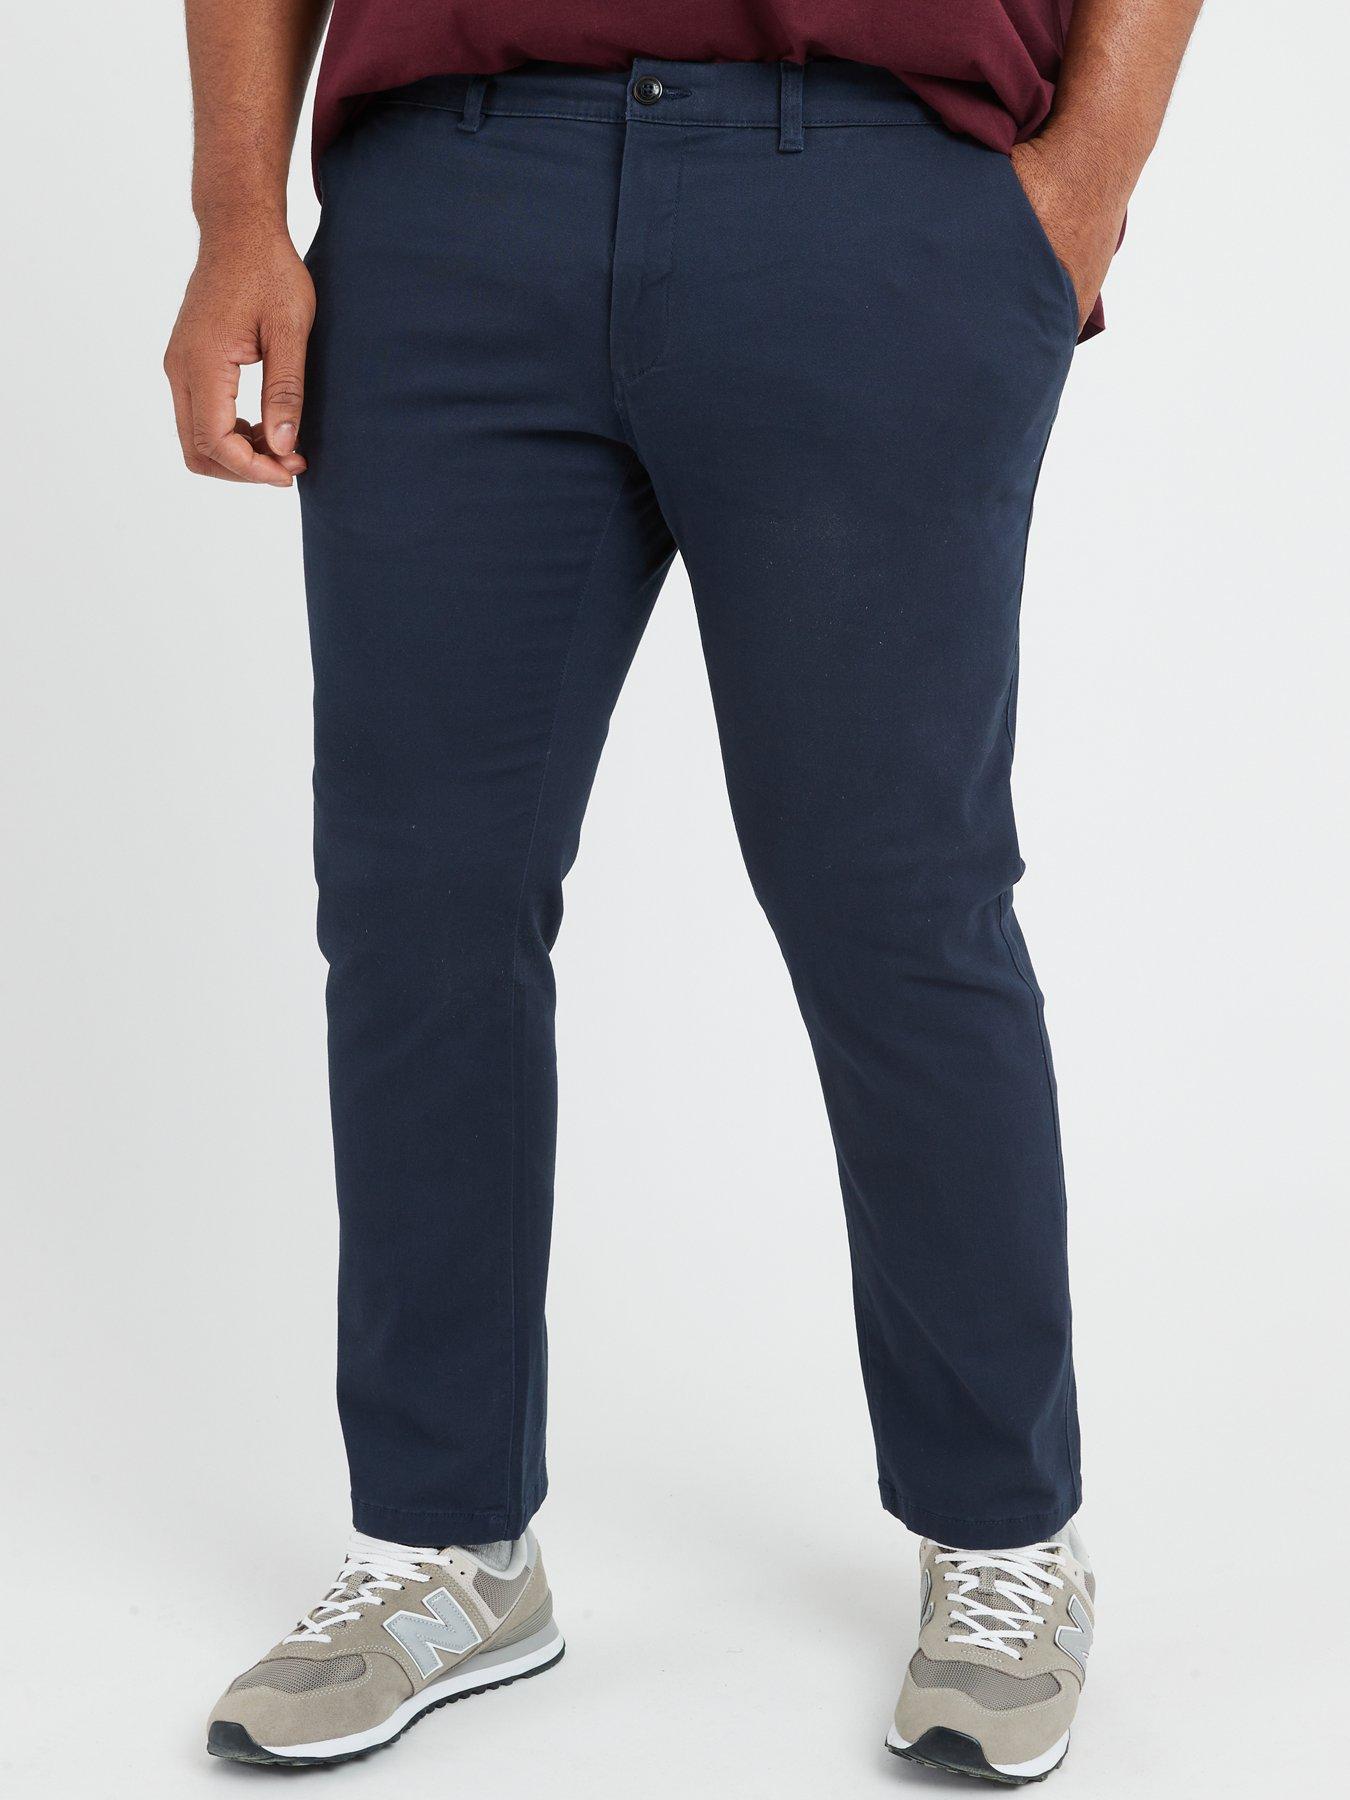 Navy Straight Fit Stretch Chino Trousers | Men | George at ASDA